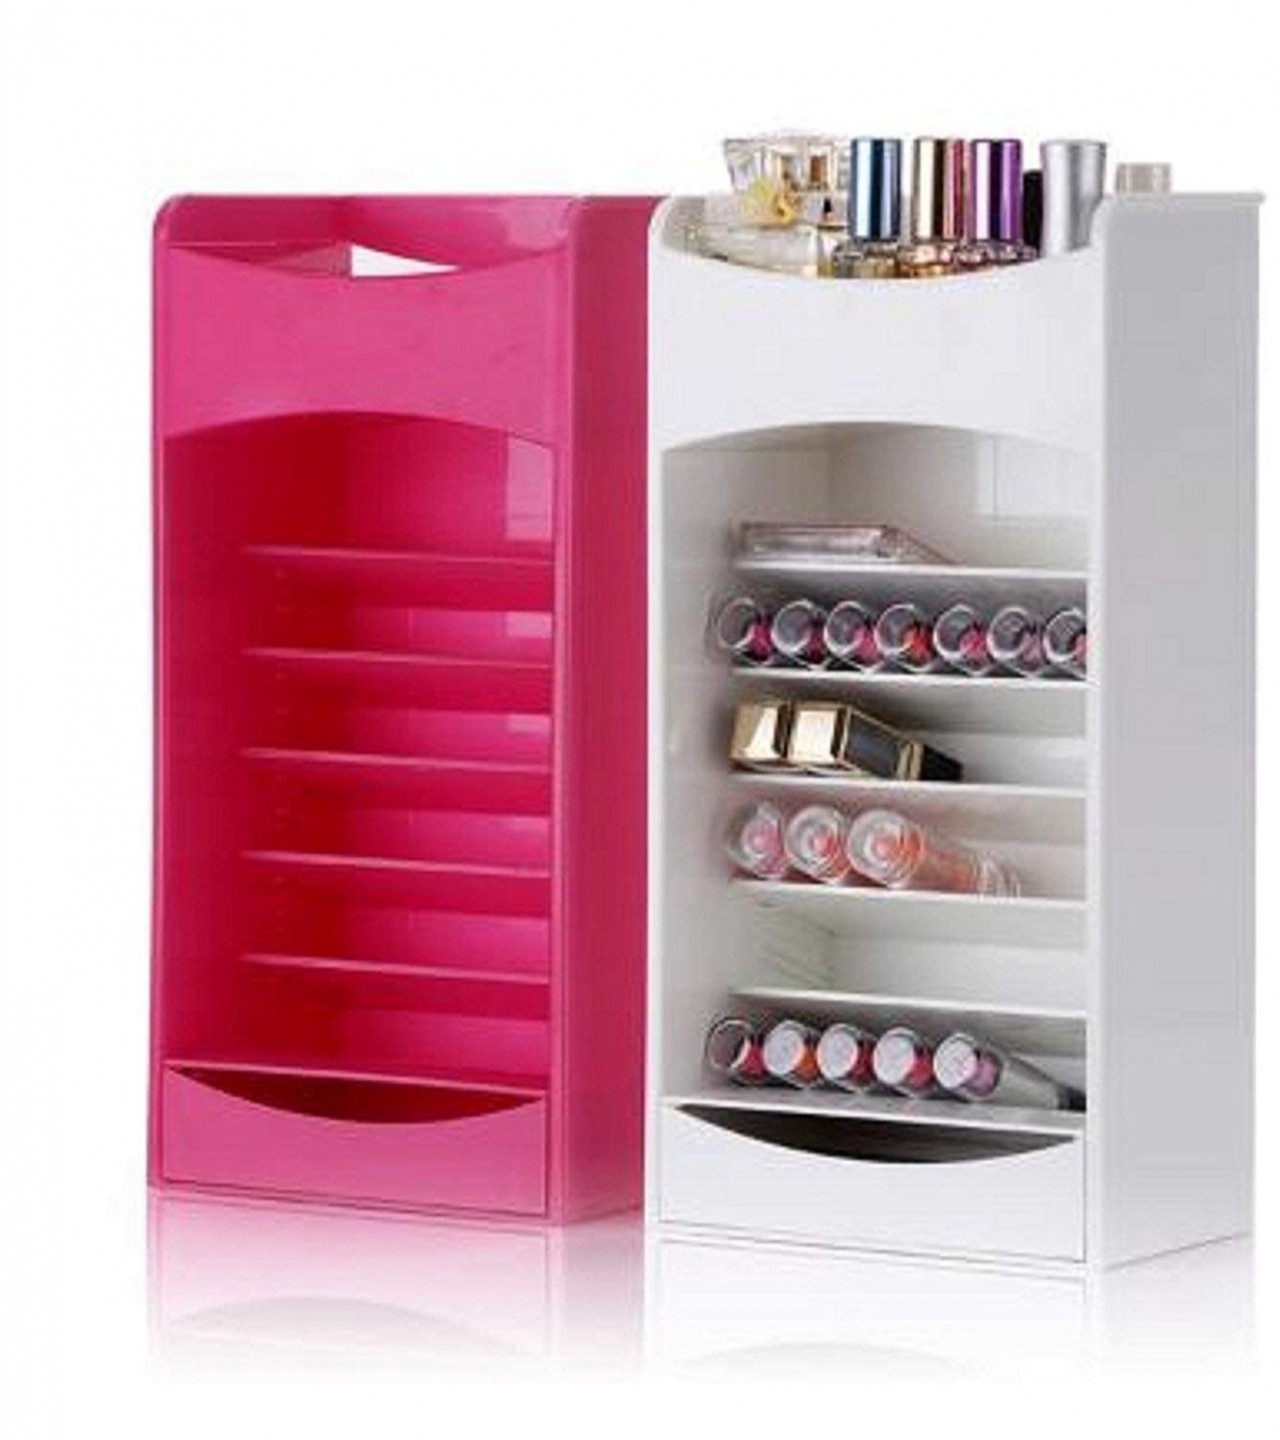 LWVAX Cosmake Cosmetic Storage and Organizer with multi layer adjustable rack Holder and a draw